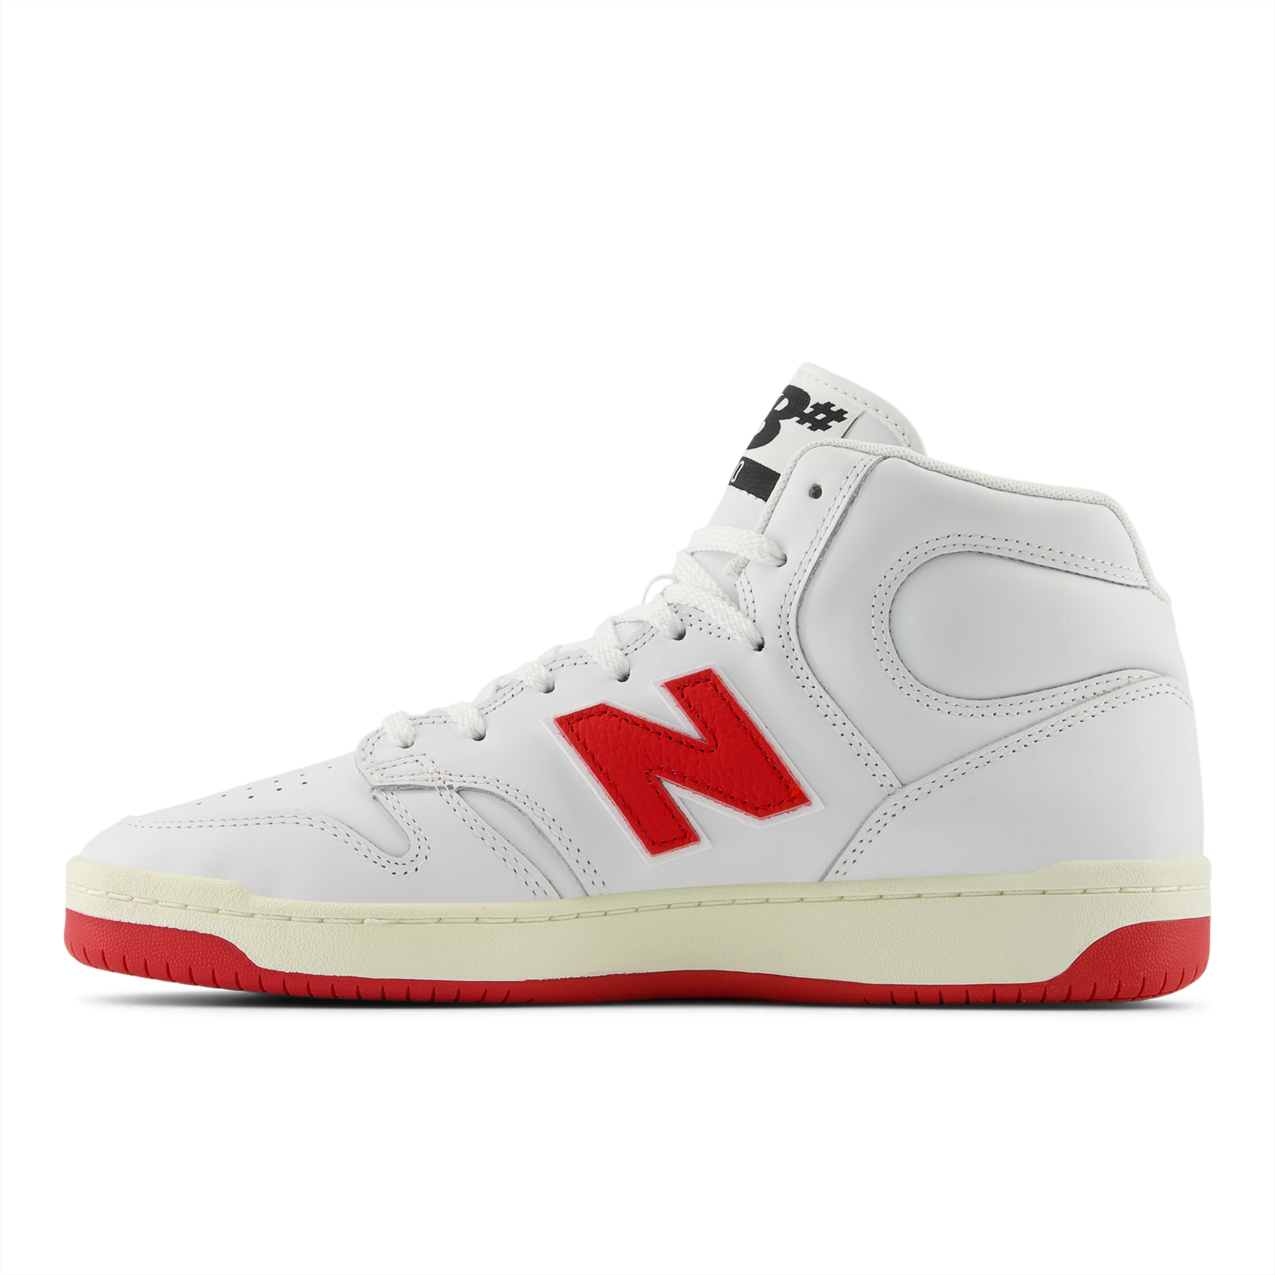 New Balance Numeric Men's 480 High White Red Shoes